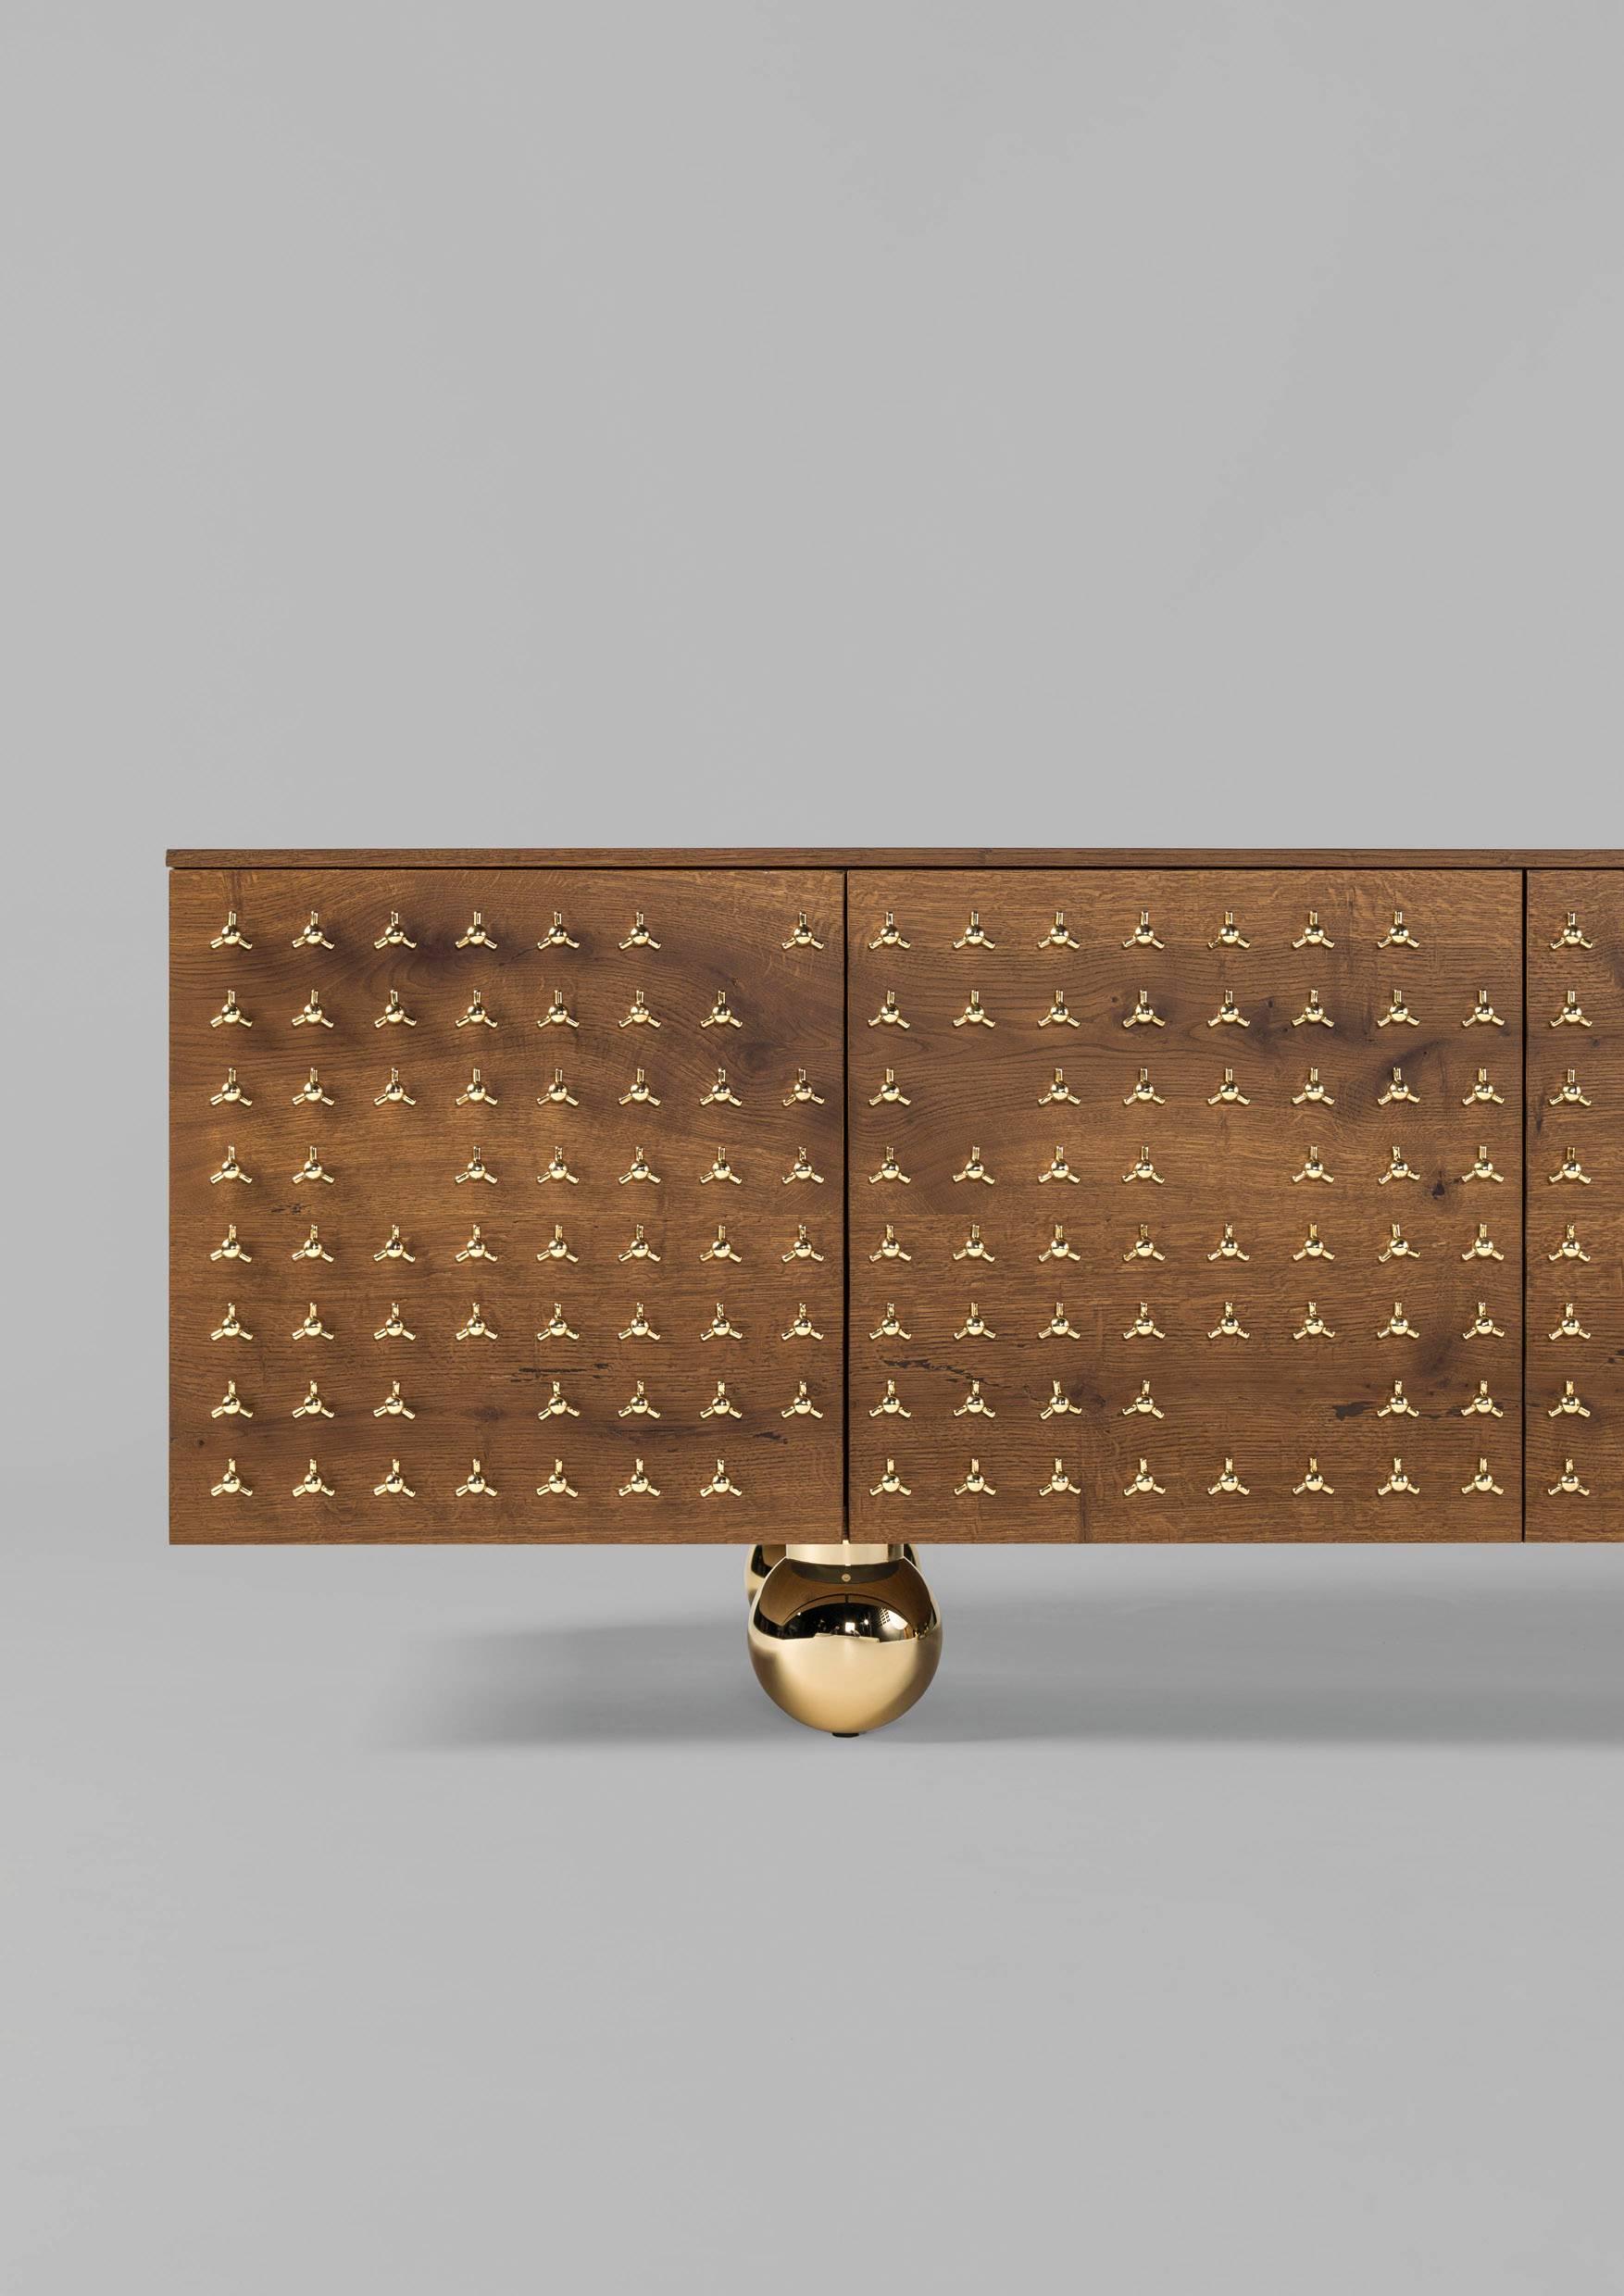 Helix cabinet limited edition of 3, designed by Ramón Úbeda for BD Barcelona,
Barcelona.

Container, frontals and shelves veneered in natural stained dark oak. 
Legs in aluminum with a brass coat. Accessories in polished varnished brass.